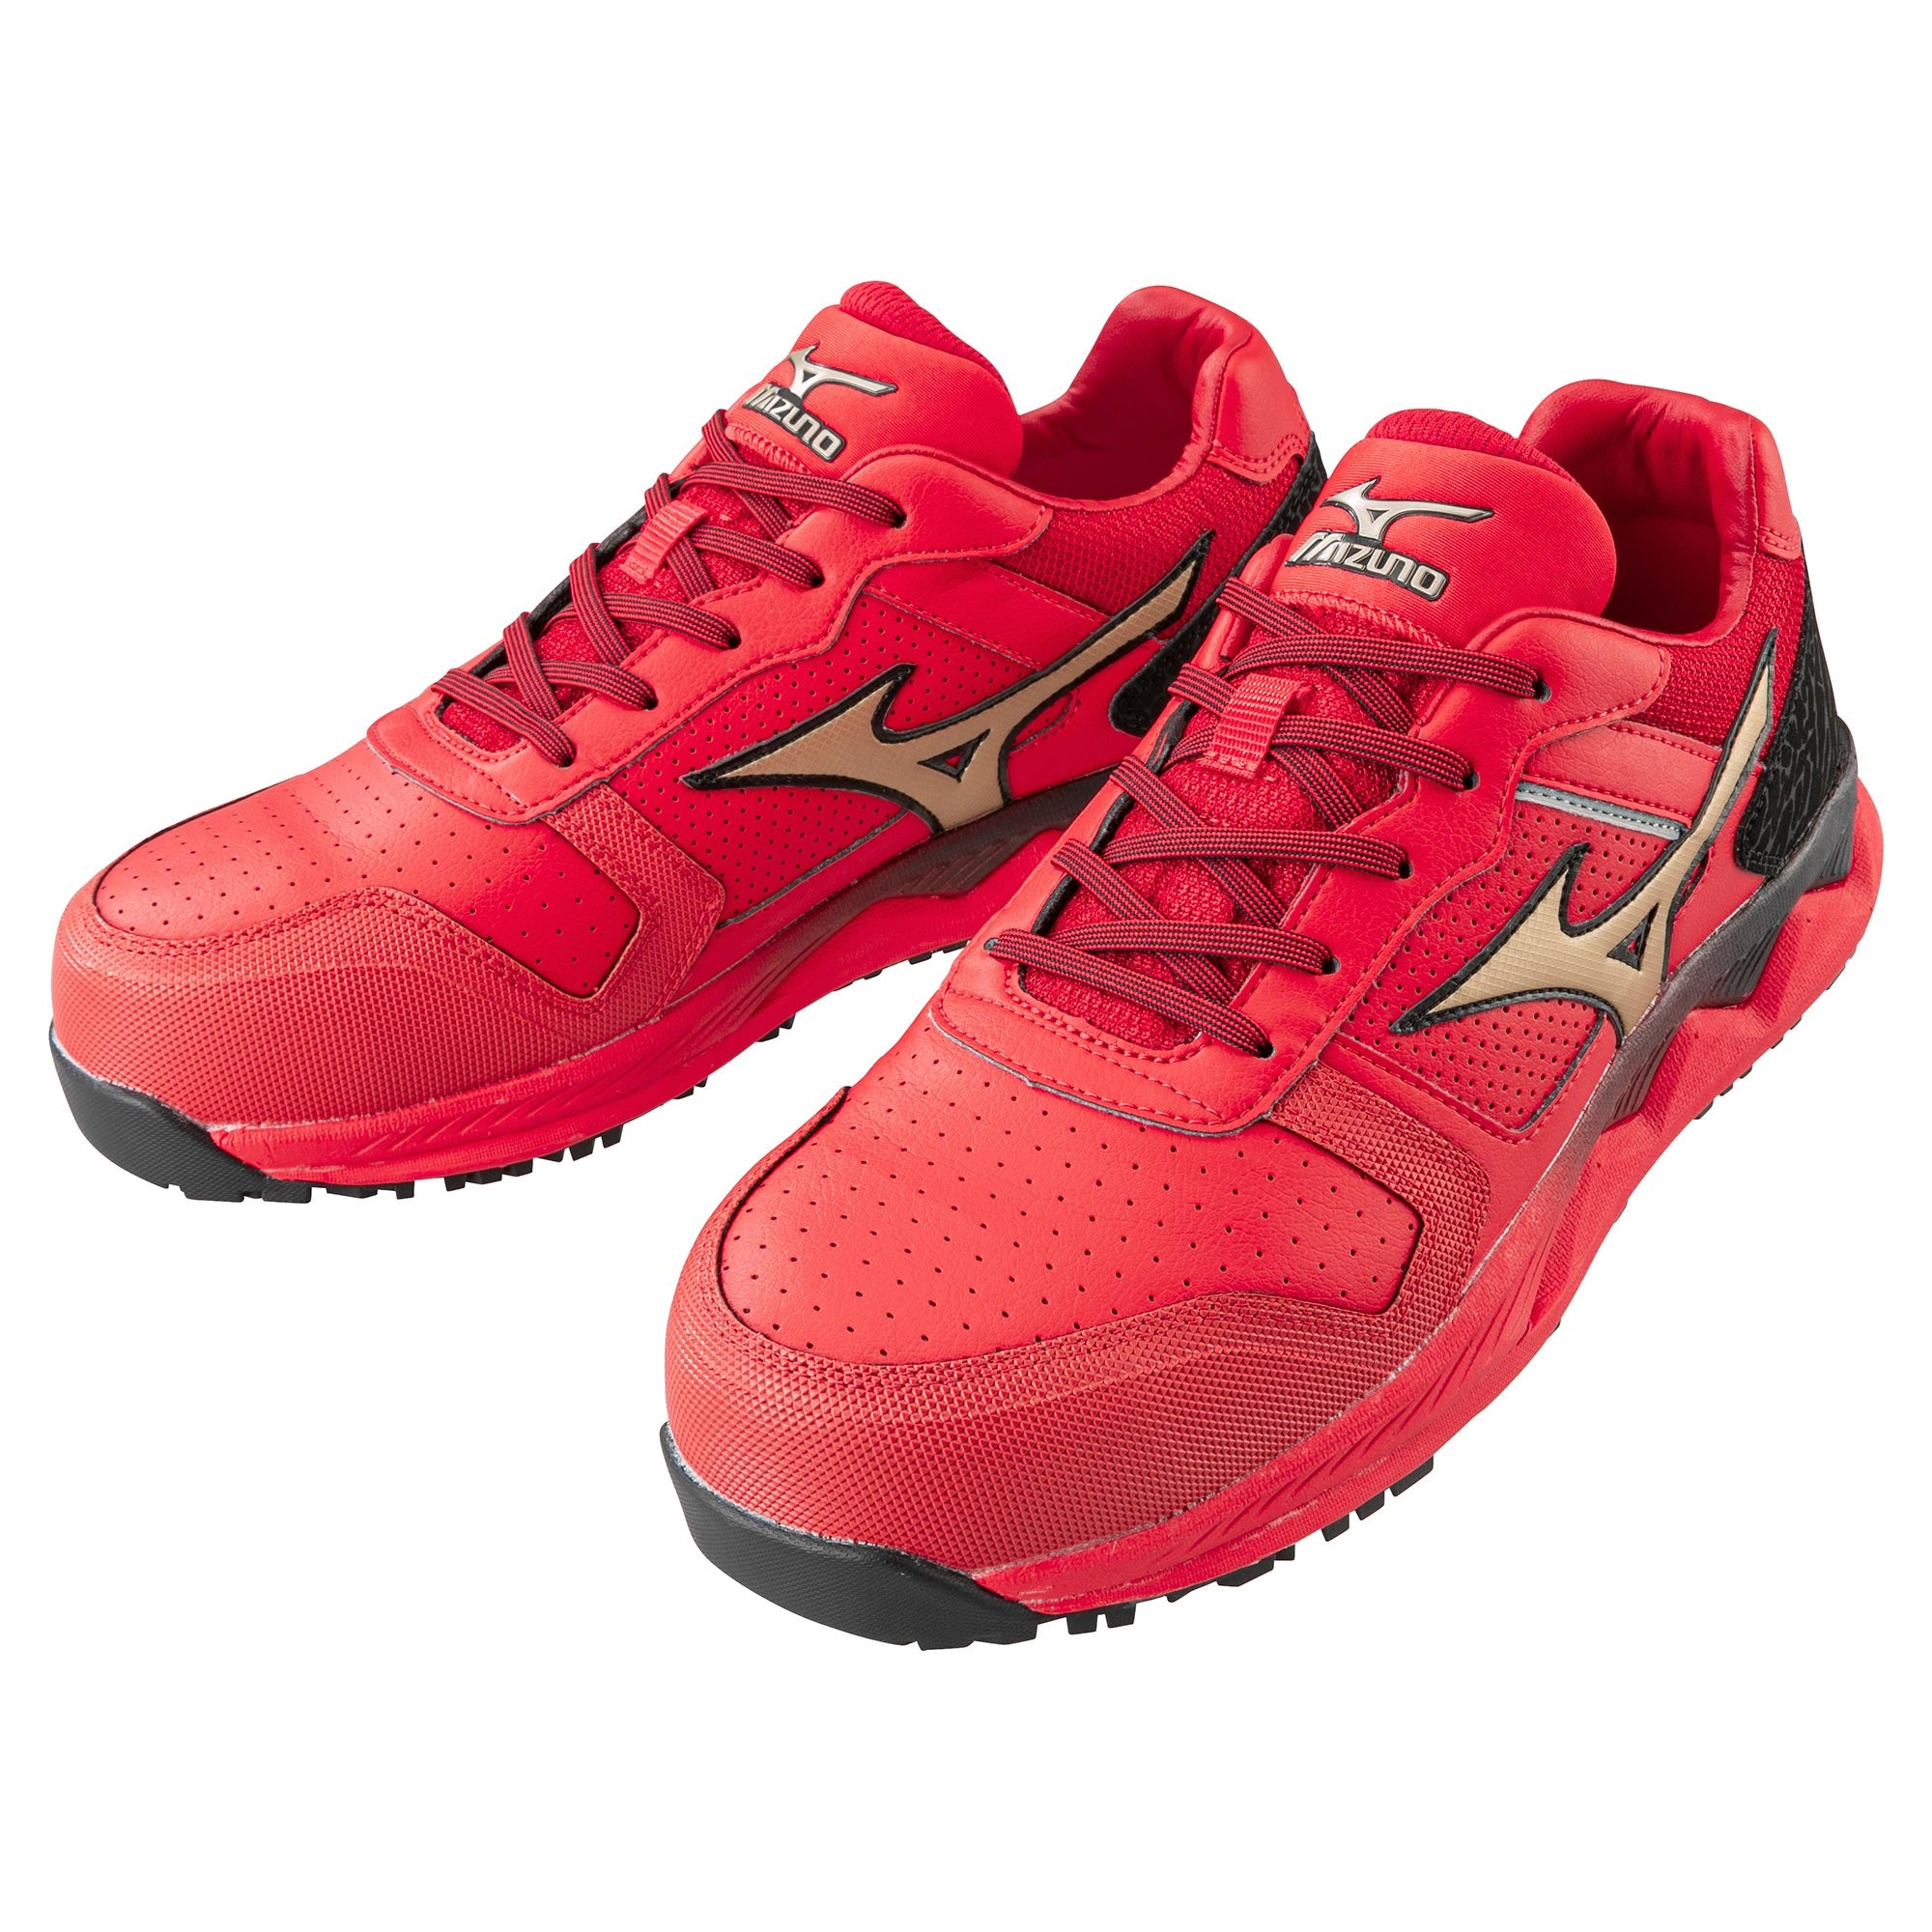 Mizuno Safety Shoes Almighty HW11L Limited Color TOM'S Collaboration